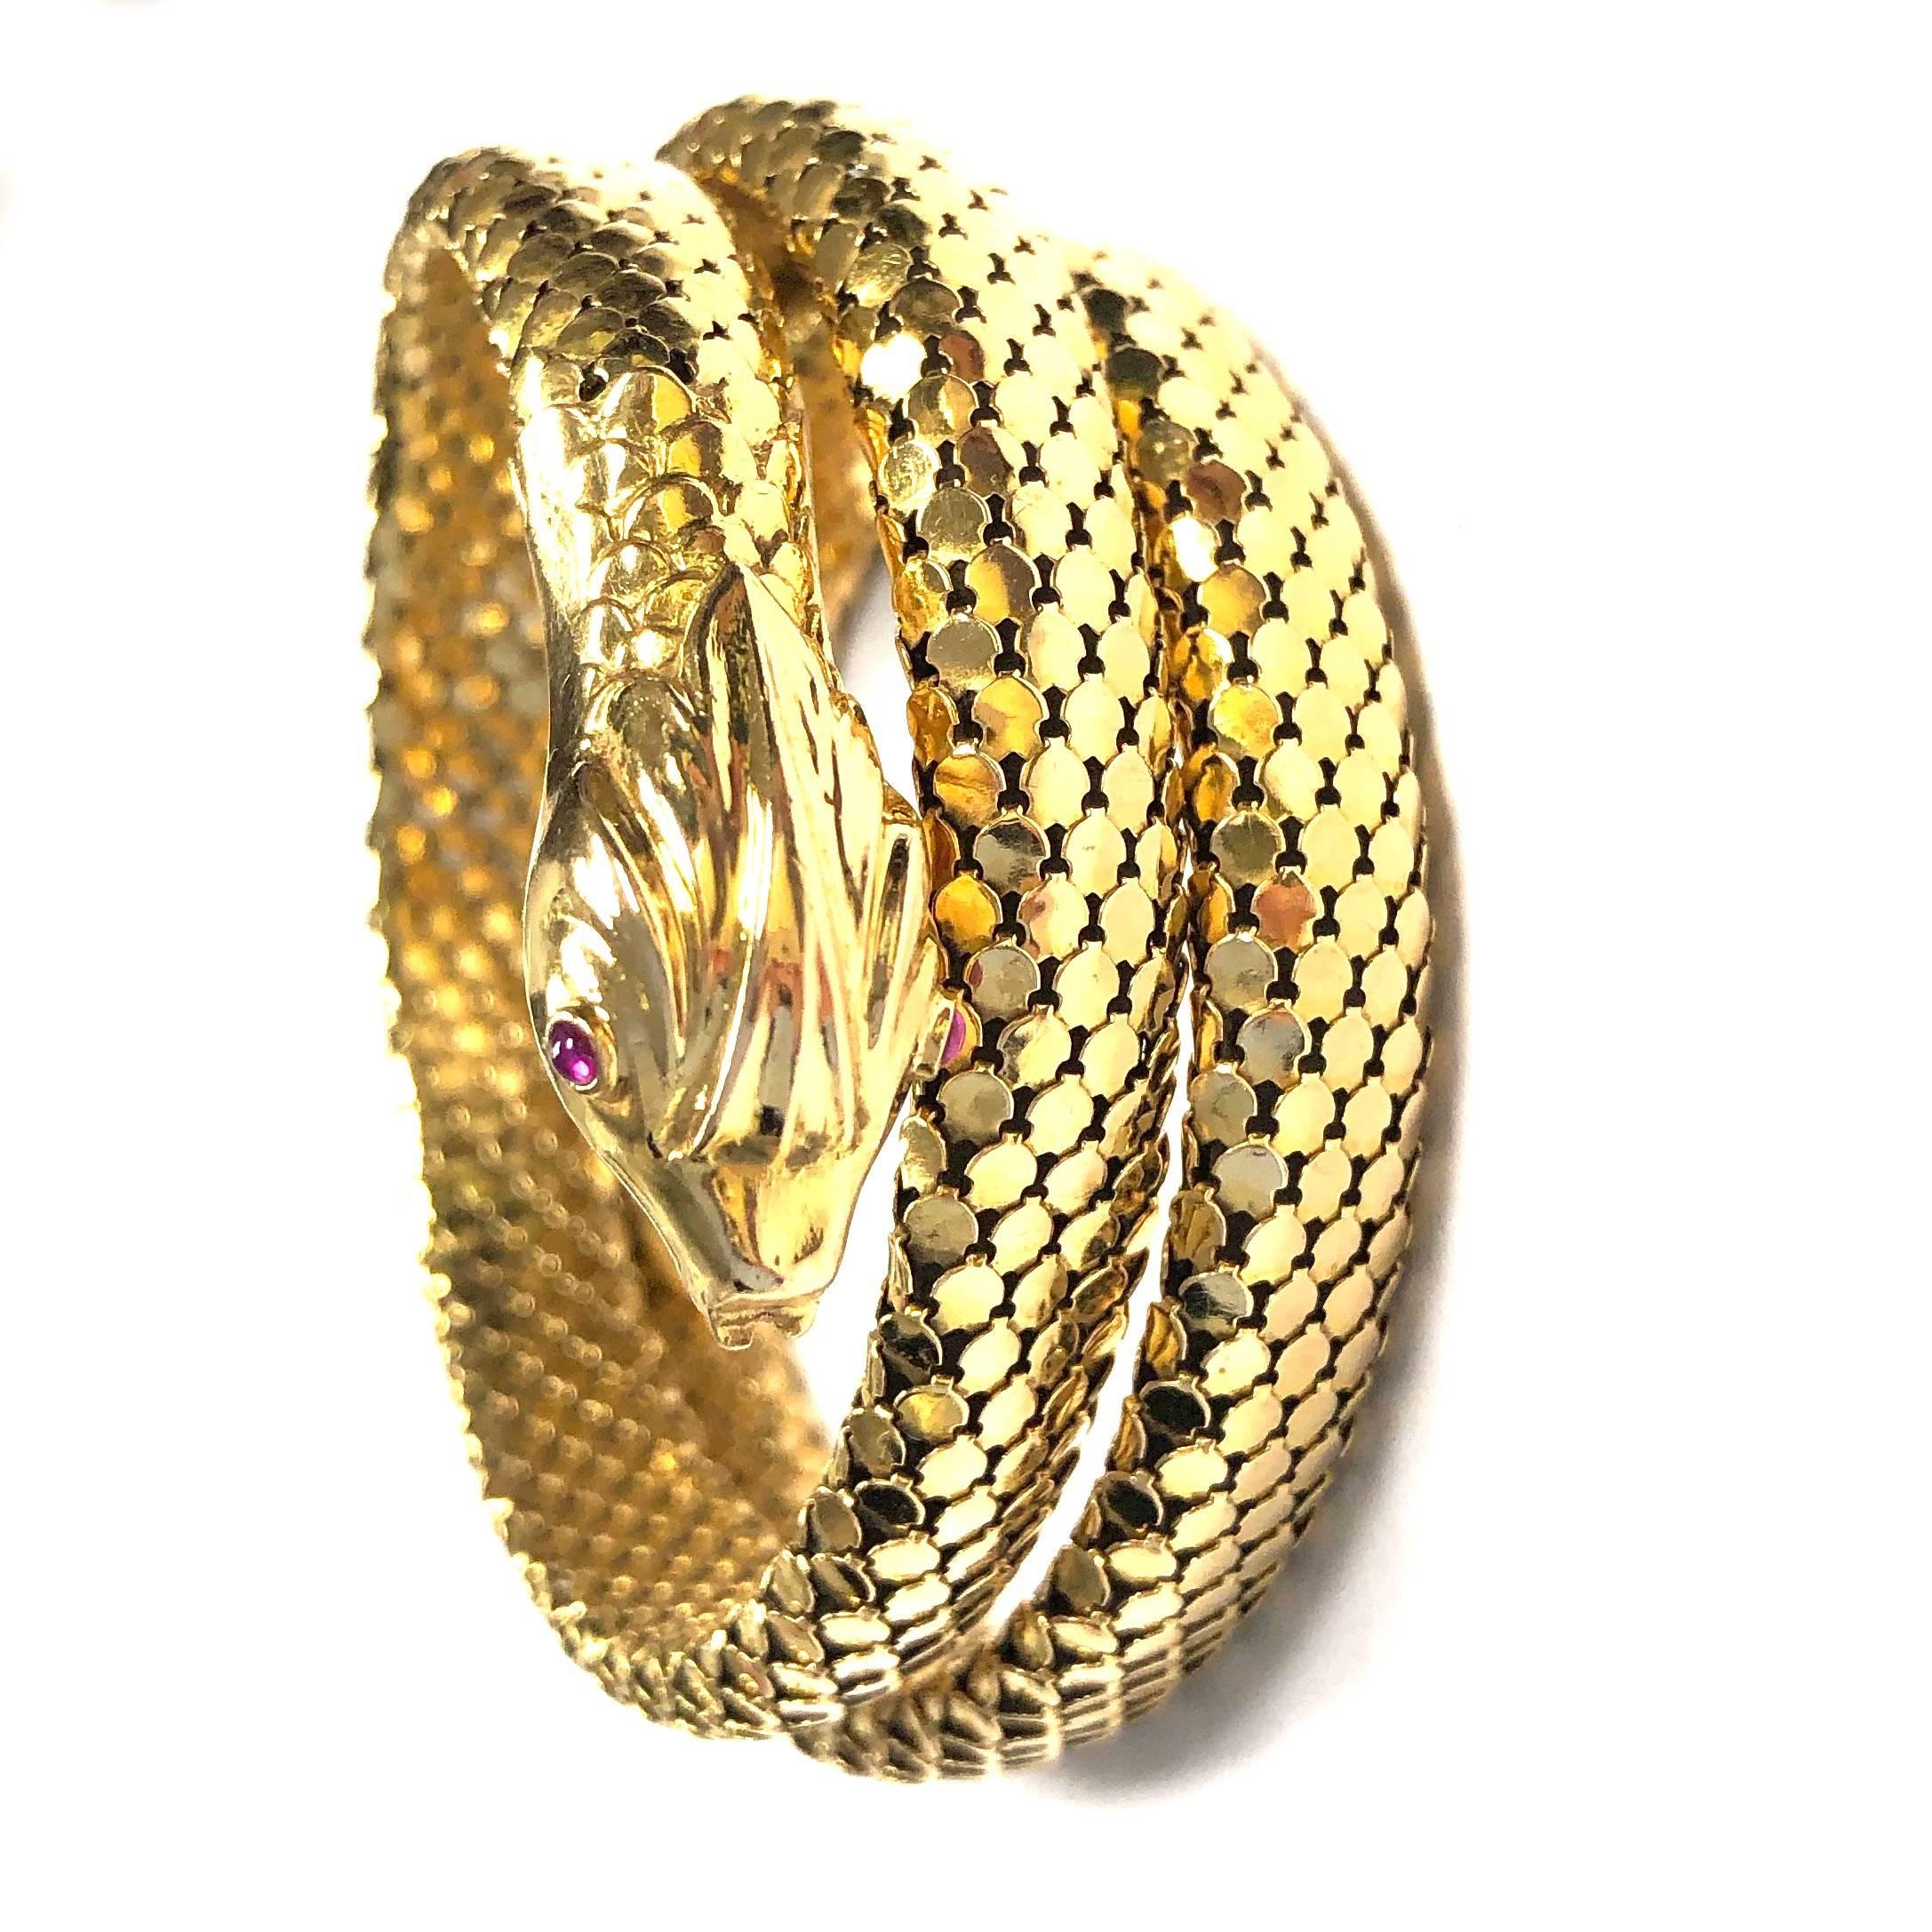 Crafted in 18kt yellow gold, comprised of the body of a serpent which coils three times around the wrist. The body is textured with small gold plaques piece together to represent scales. The head of the snake has a three-dimensional design with ruby